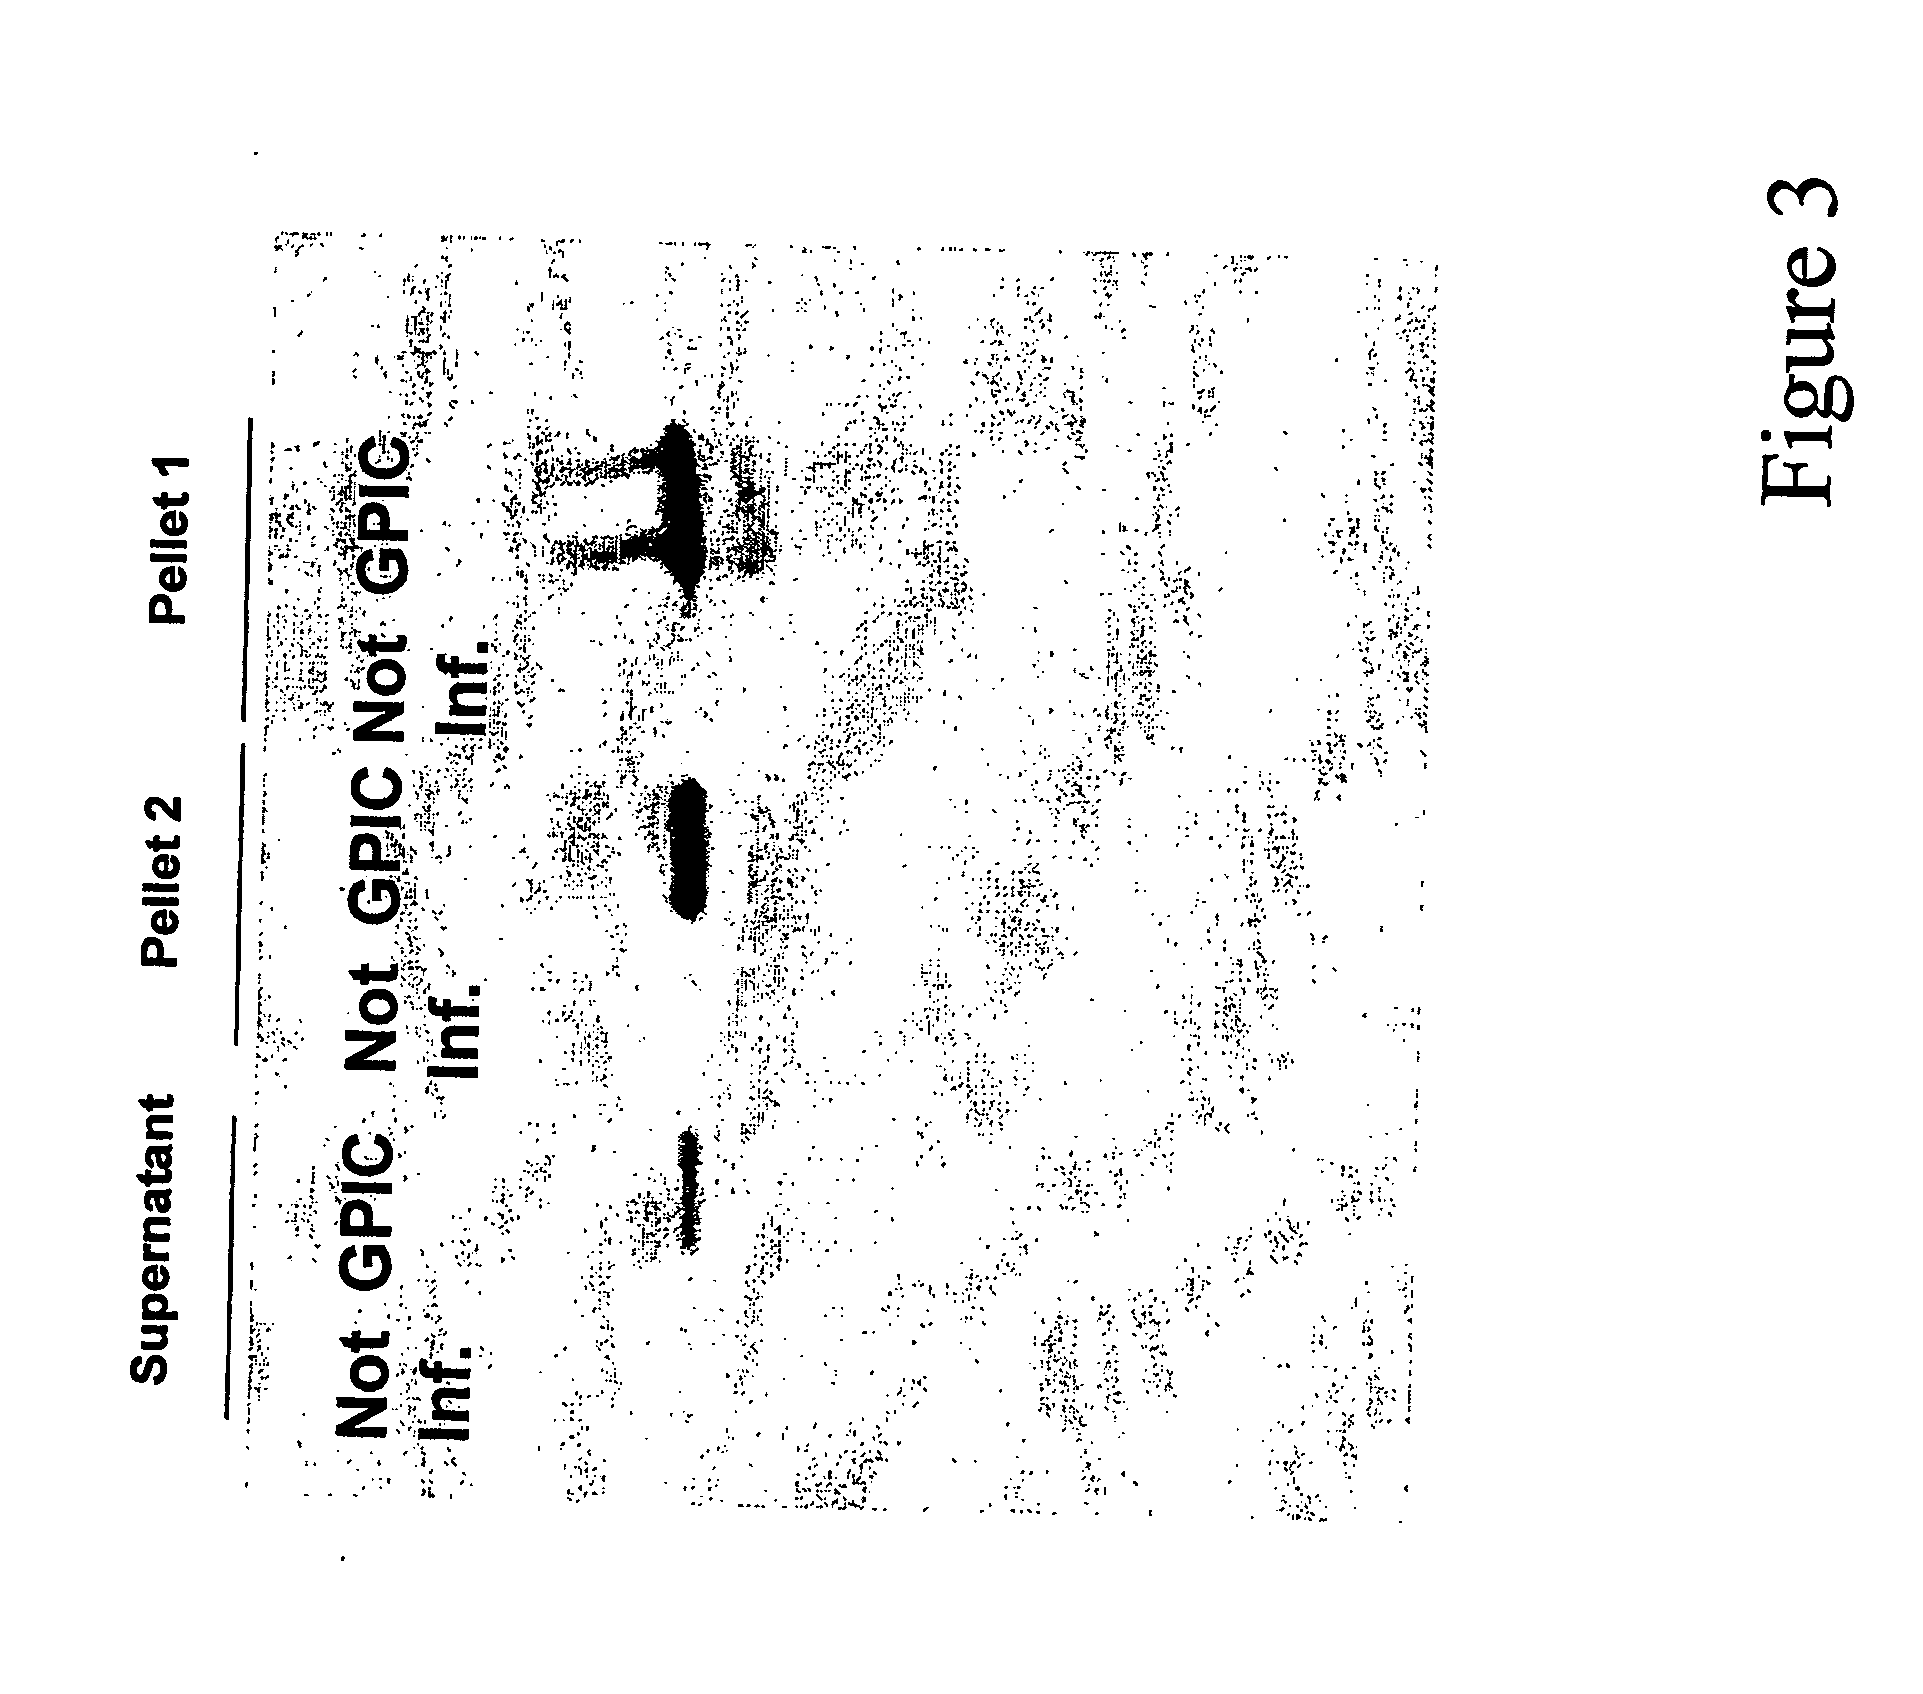 Secreted chlamydia polypeptides, polynucleotides coding therefor, therapeutic and diagnostic uses thereof